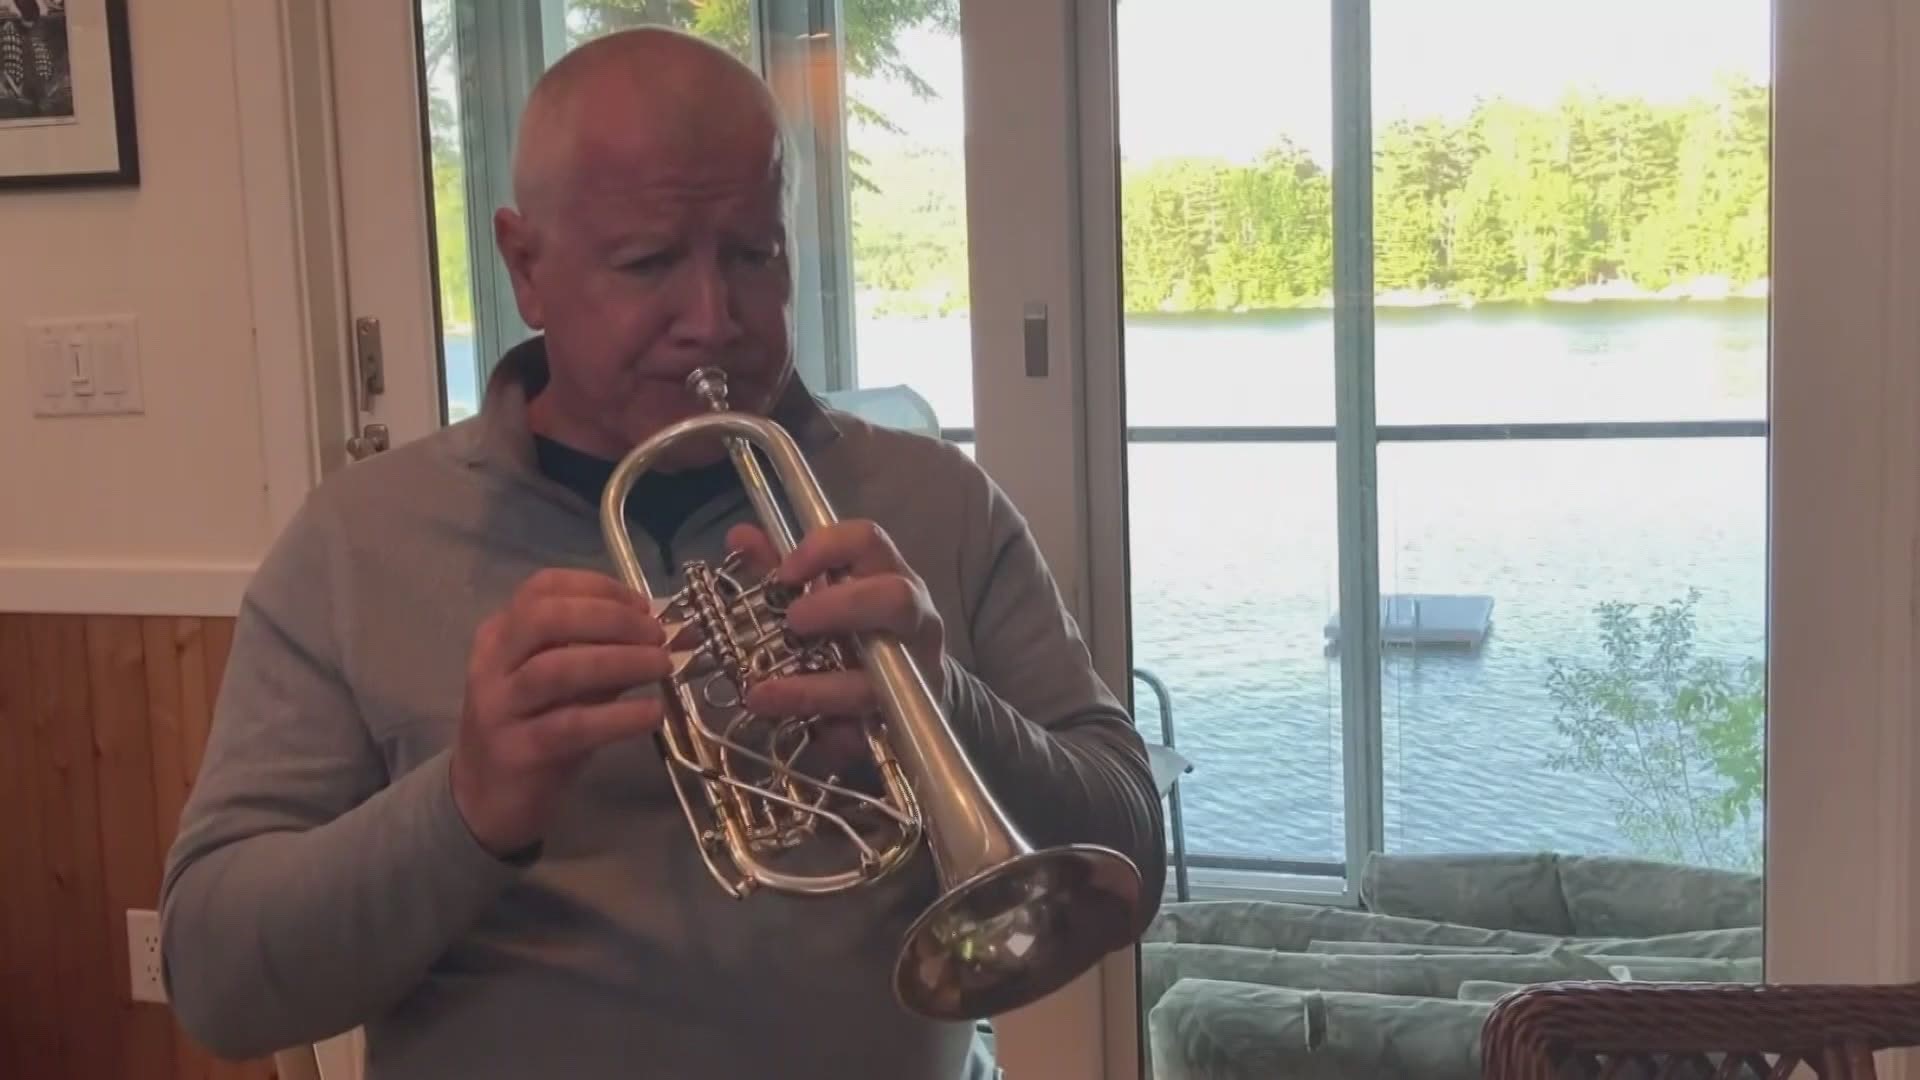 University of Maine Professor Jack Burt posts "An Etude a Day" in an effort to stay sharp on the trumpet.